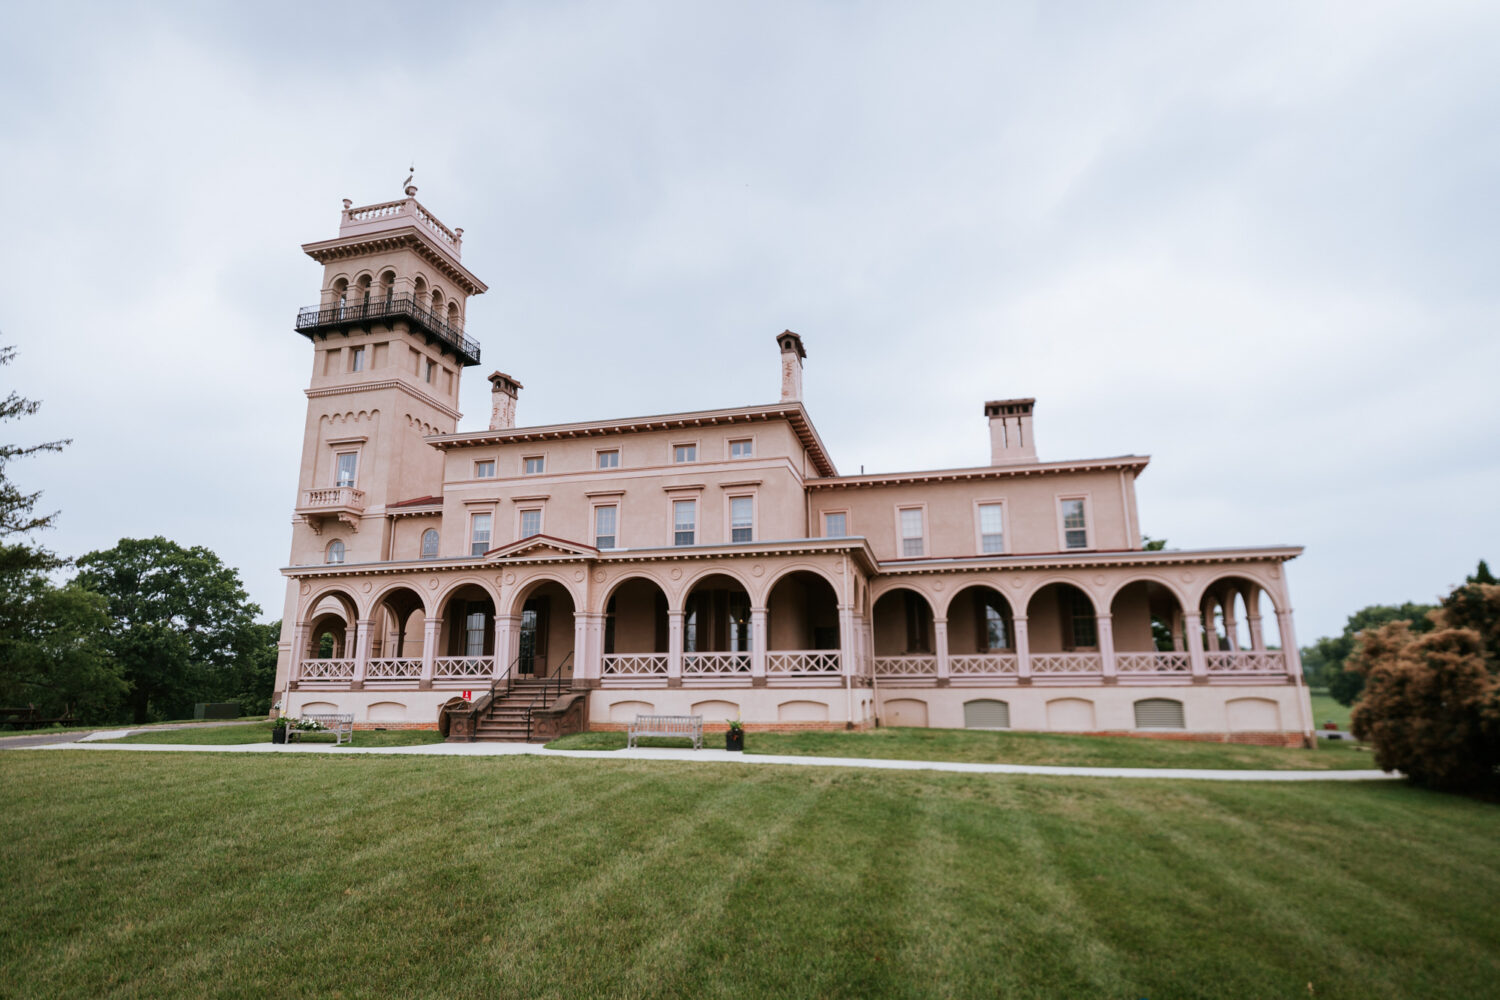 photo of the clifton mansion building in baltimore maryland